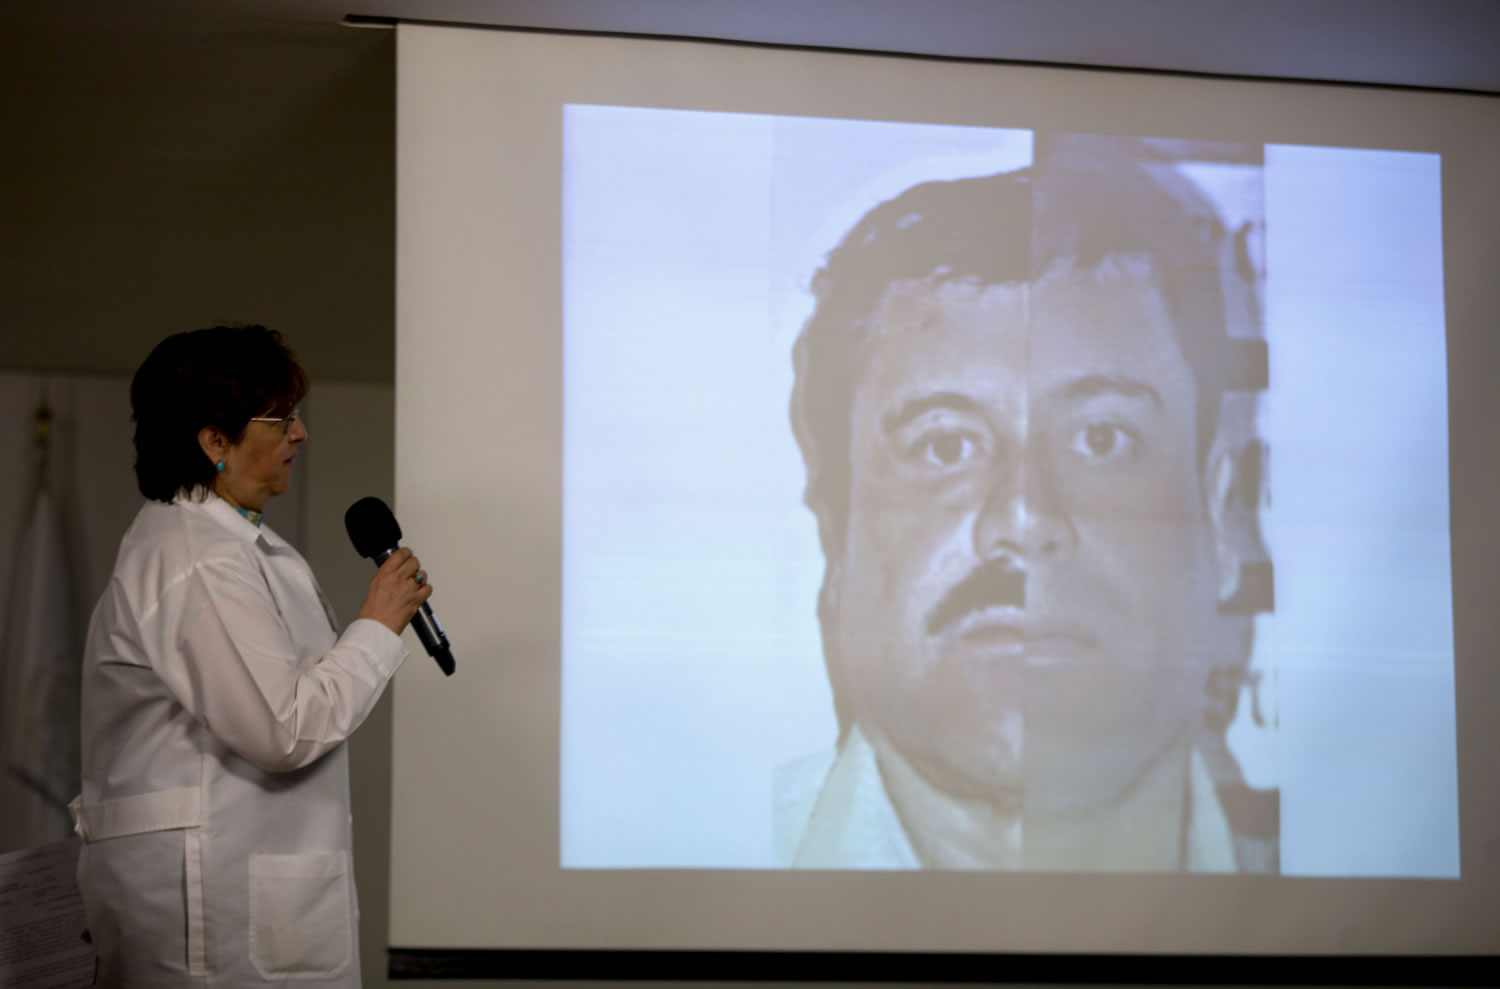 Sara Medina of Mexico's Attorney General's office shows combined images of Joaquin Guzman Loera on Tuesday at a news conference in Mexico City.